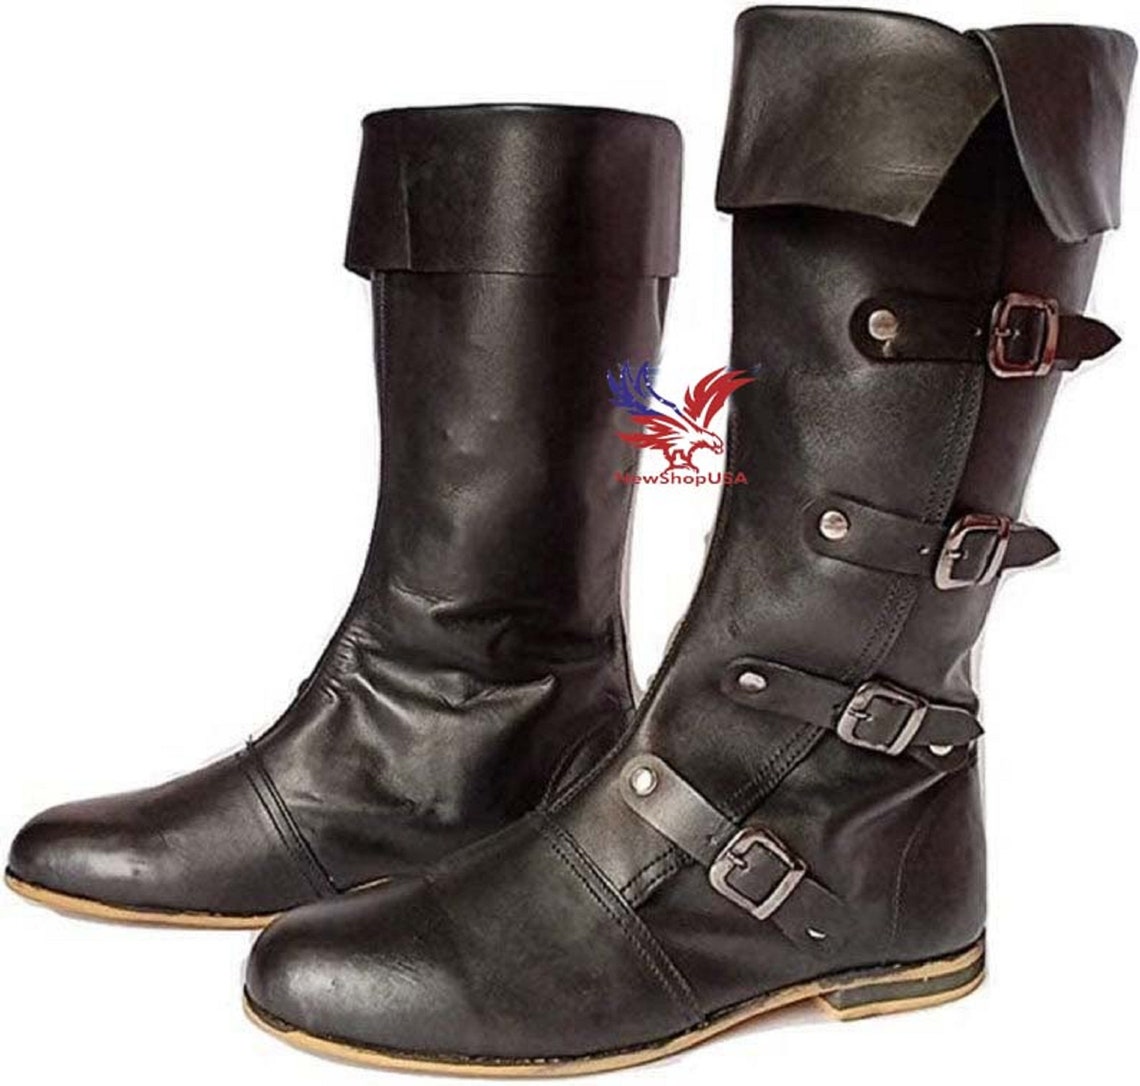 Medieval Leather Boots RENAISSANCE Viking Pirate Boots Mans - Etsy